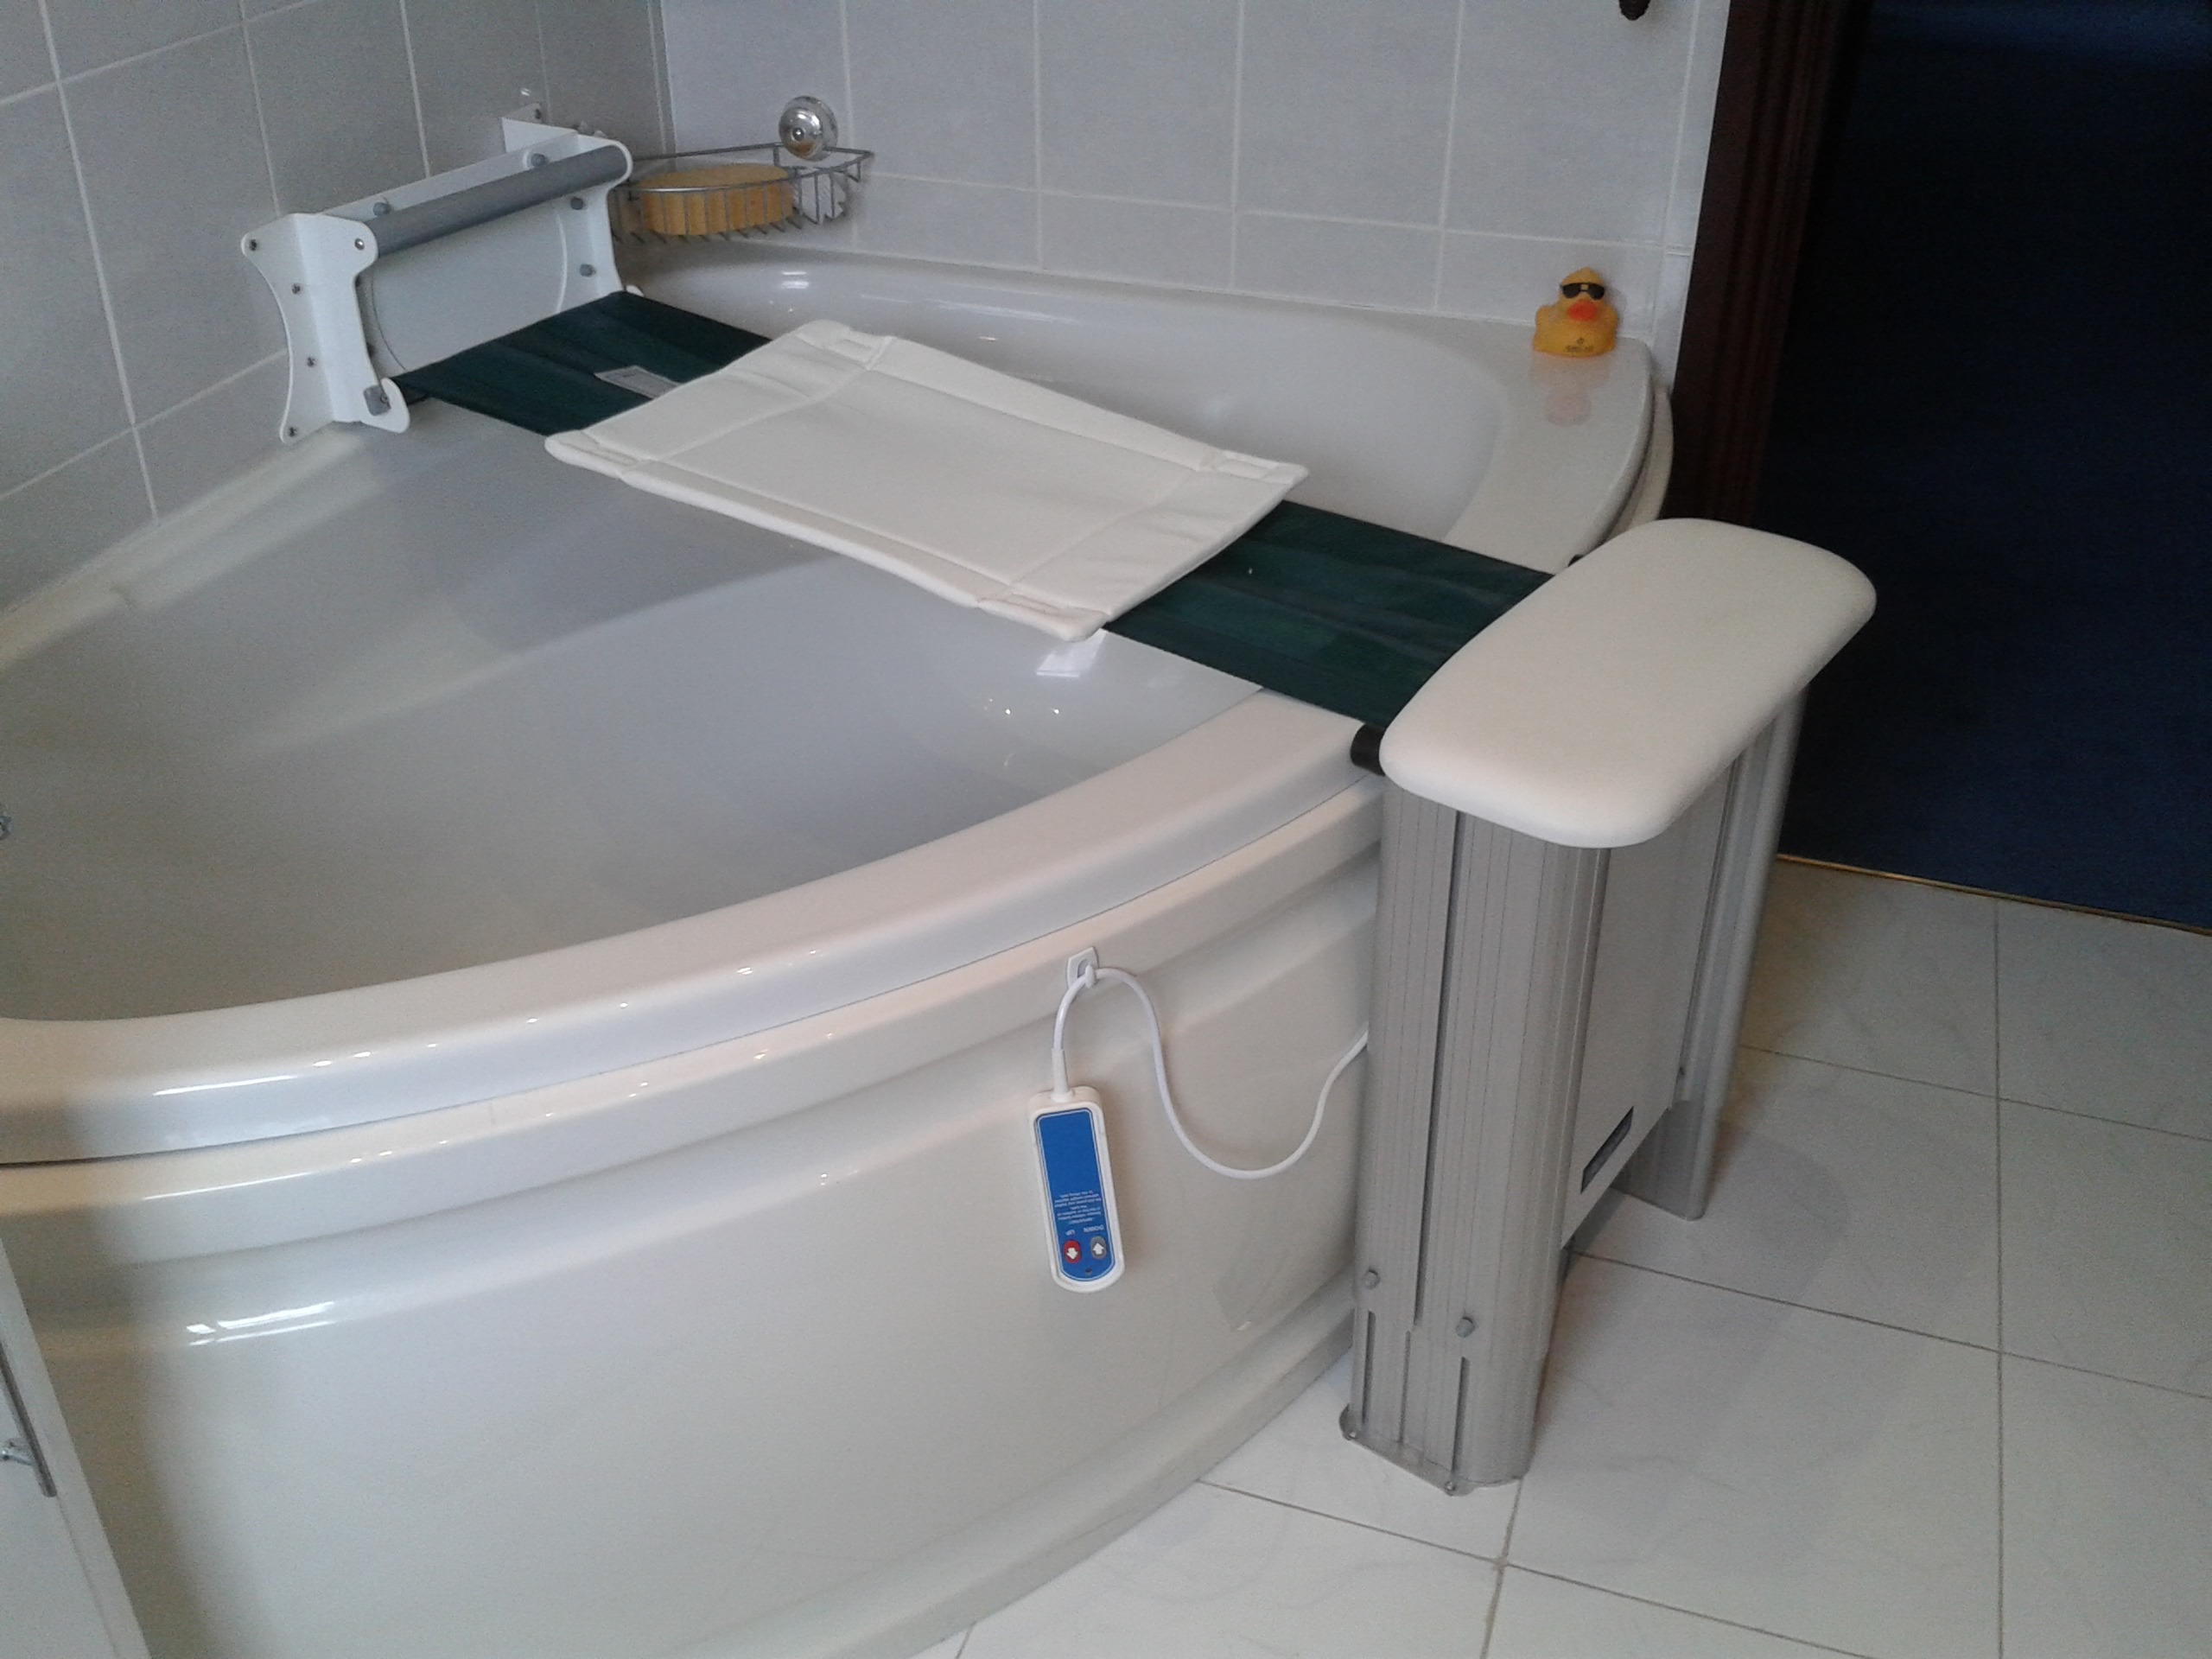 Molly Bather The Easy Way To Enjoy, Bathtub Lifts For Disabled